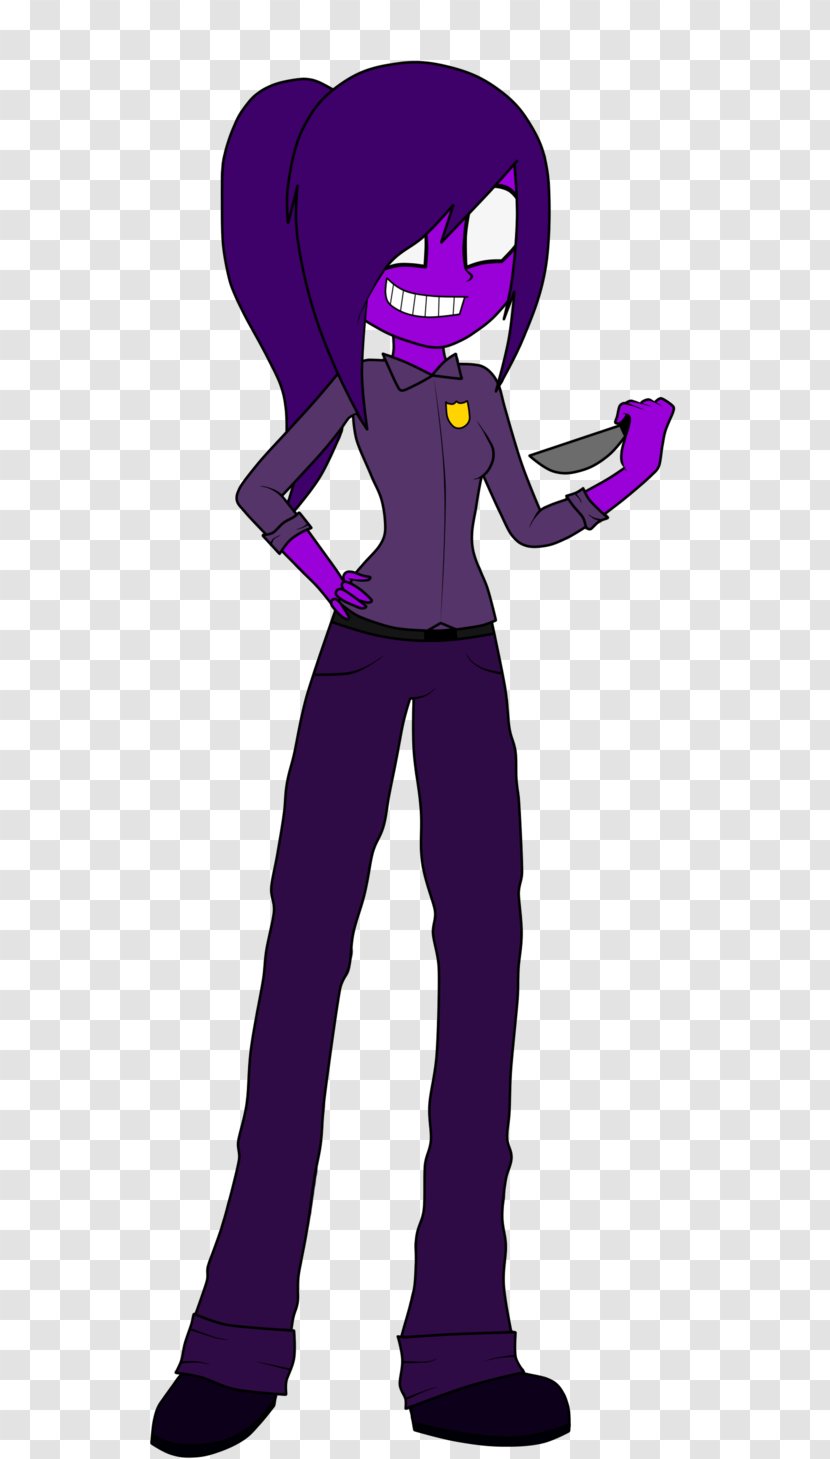 Five Nights At Freddy's 2 Freddy's: Sister Location 4 Purple - Tree Transparent PNG